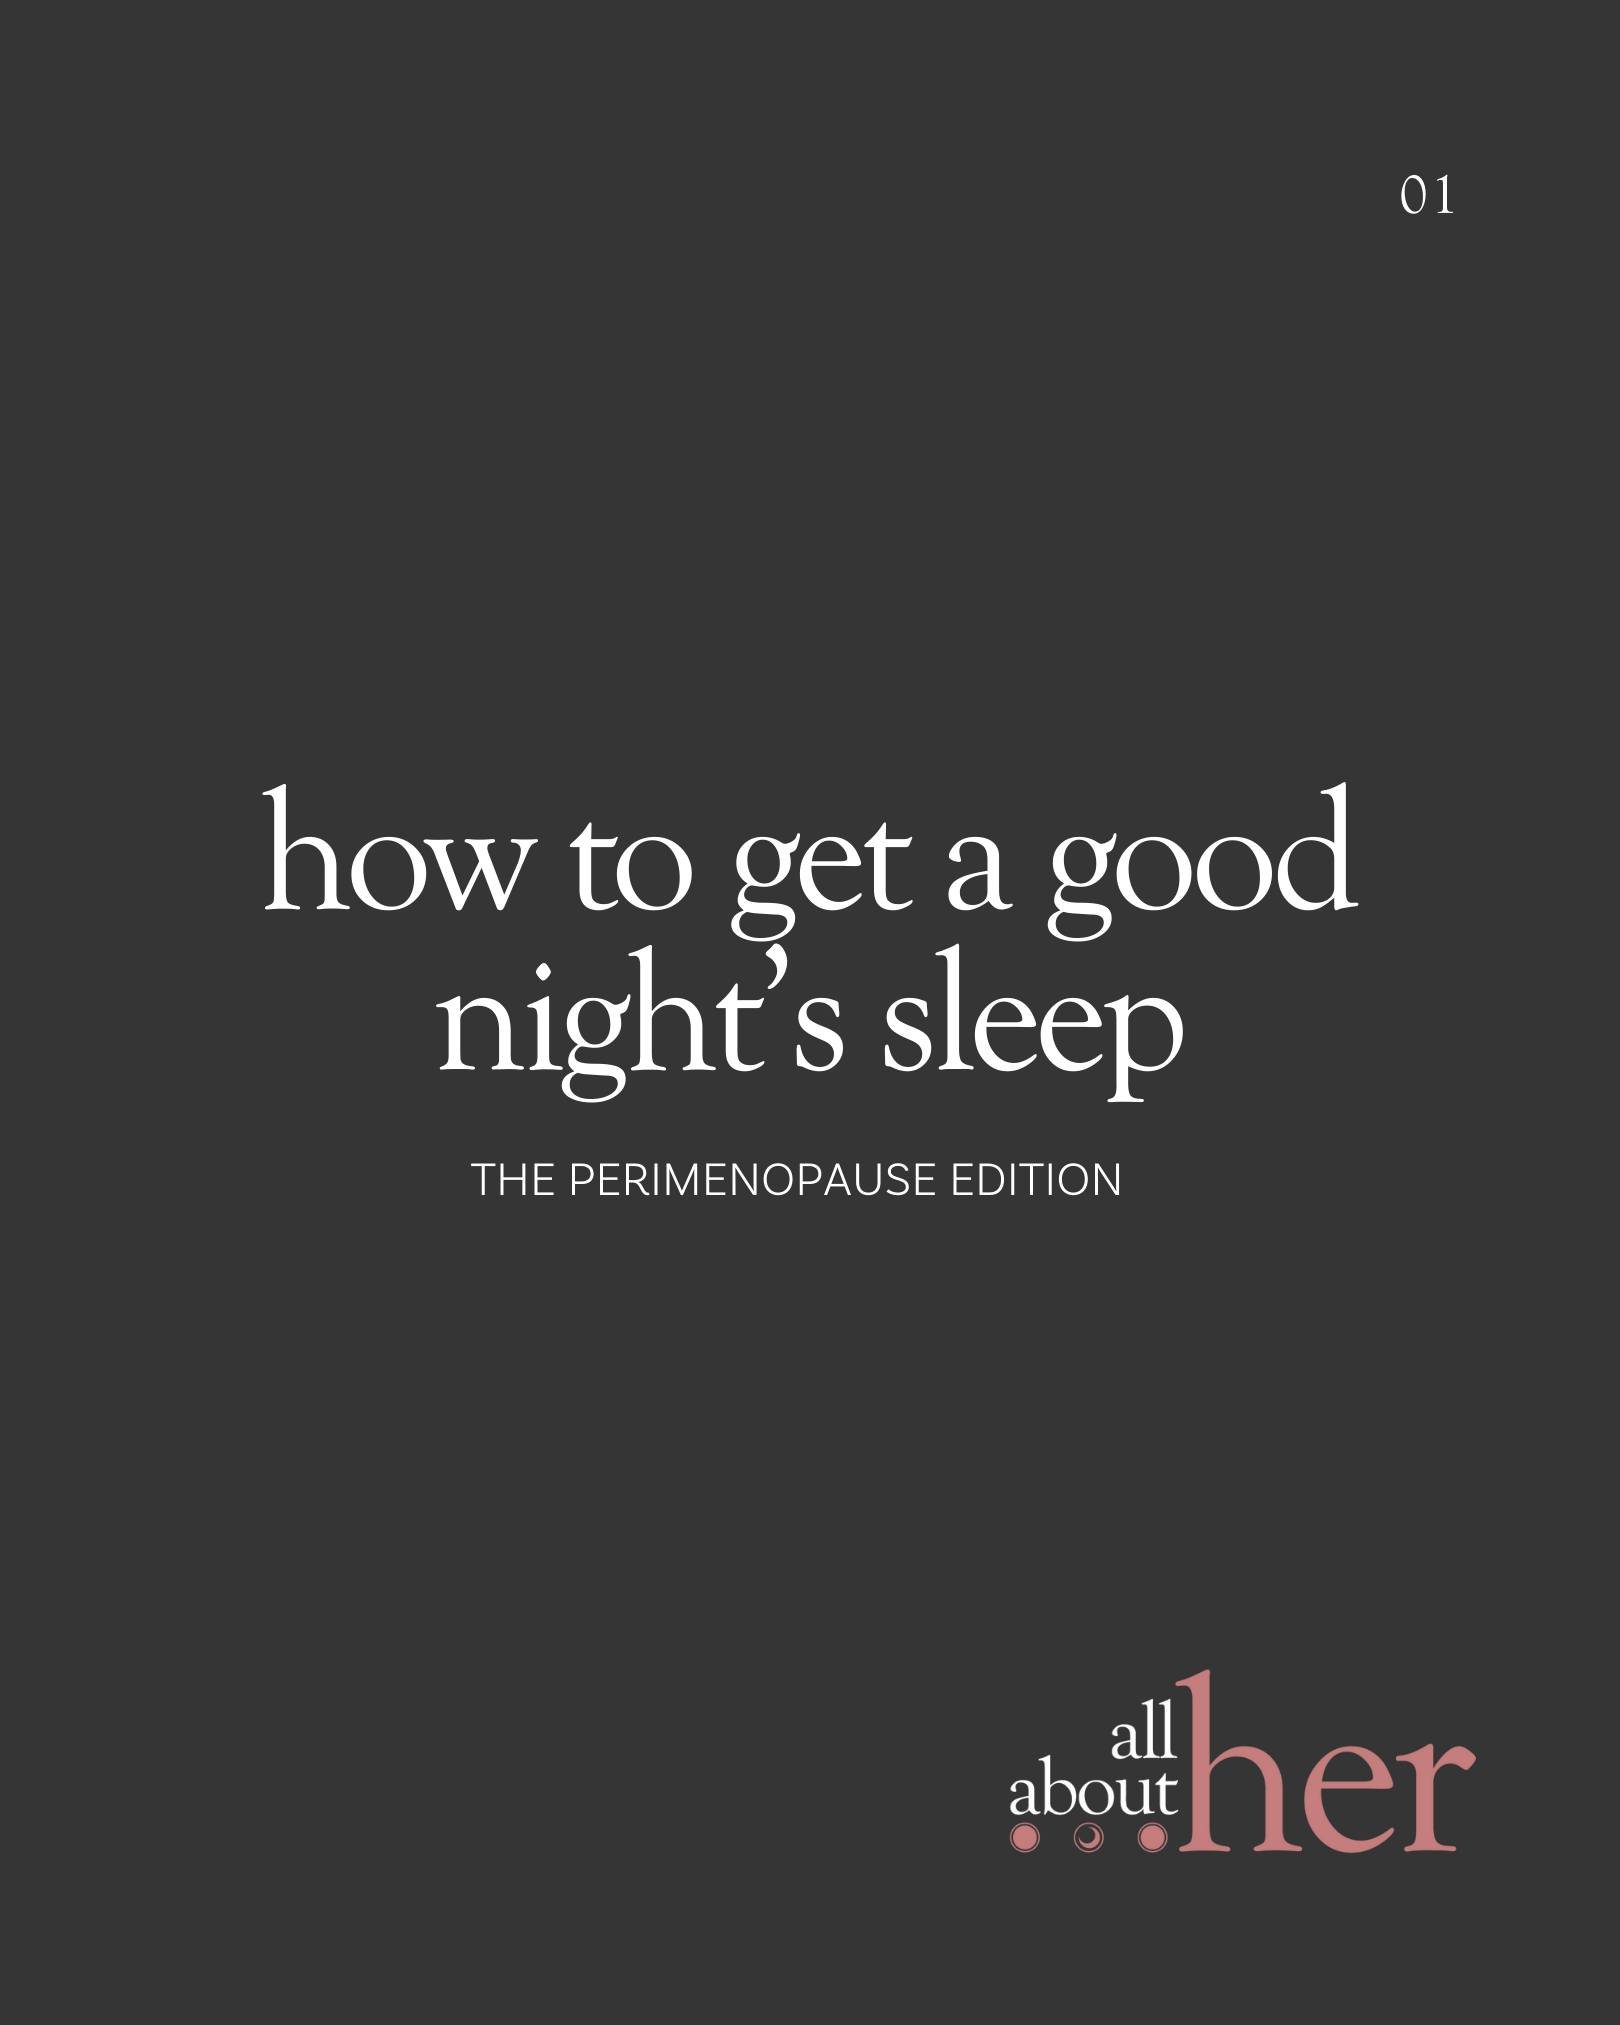 🌙 Struggling to Sleep? Perimenopause Might Be the Culprit! 😴

Ever wonder why sleep is crucial for your health? It's not just about feeling rested &ndash; it's about giving your body and brain the chance to repair, consolidate memories, regulate em